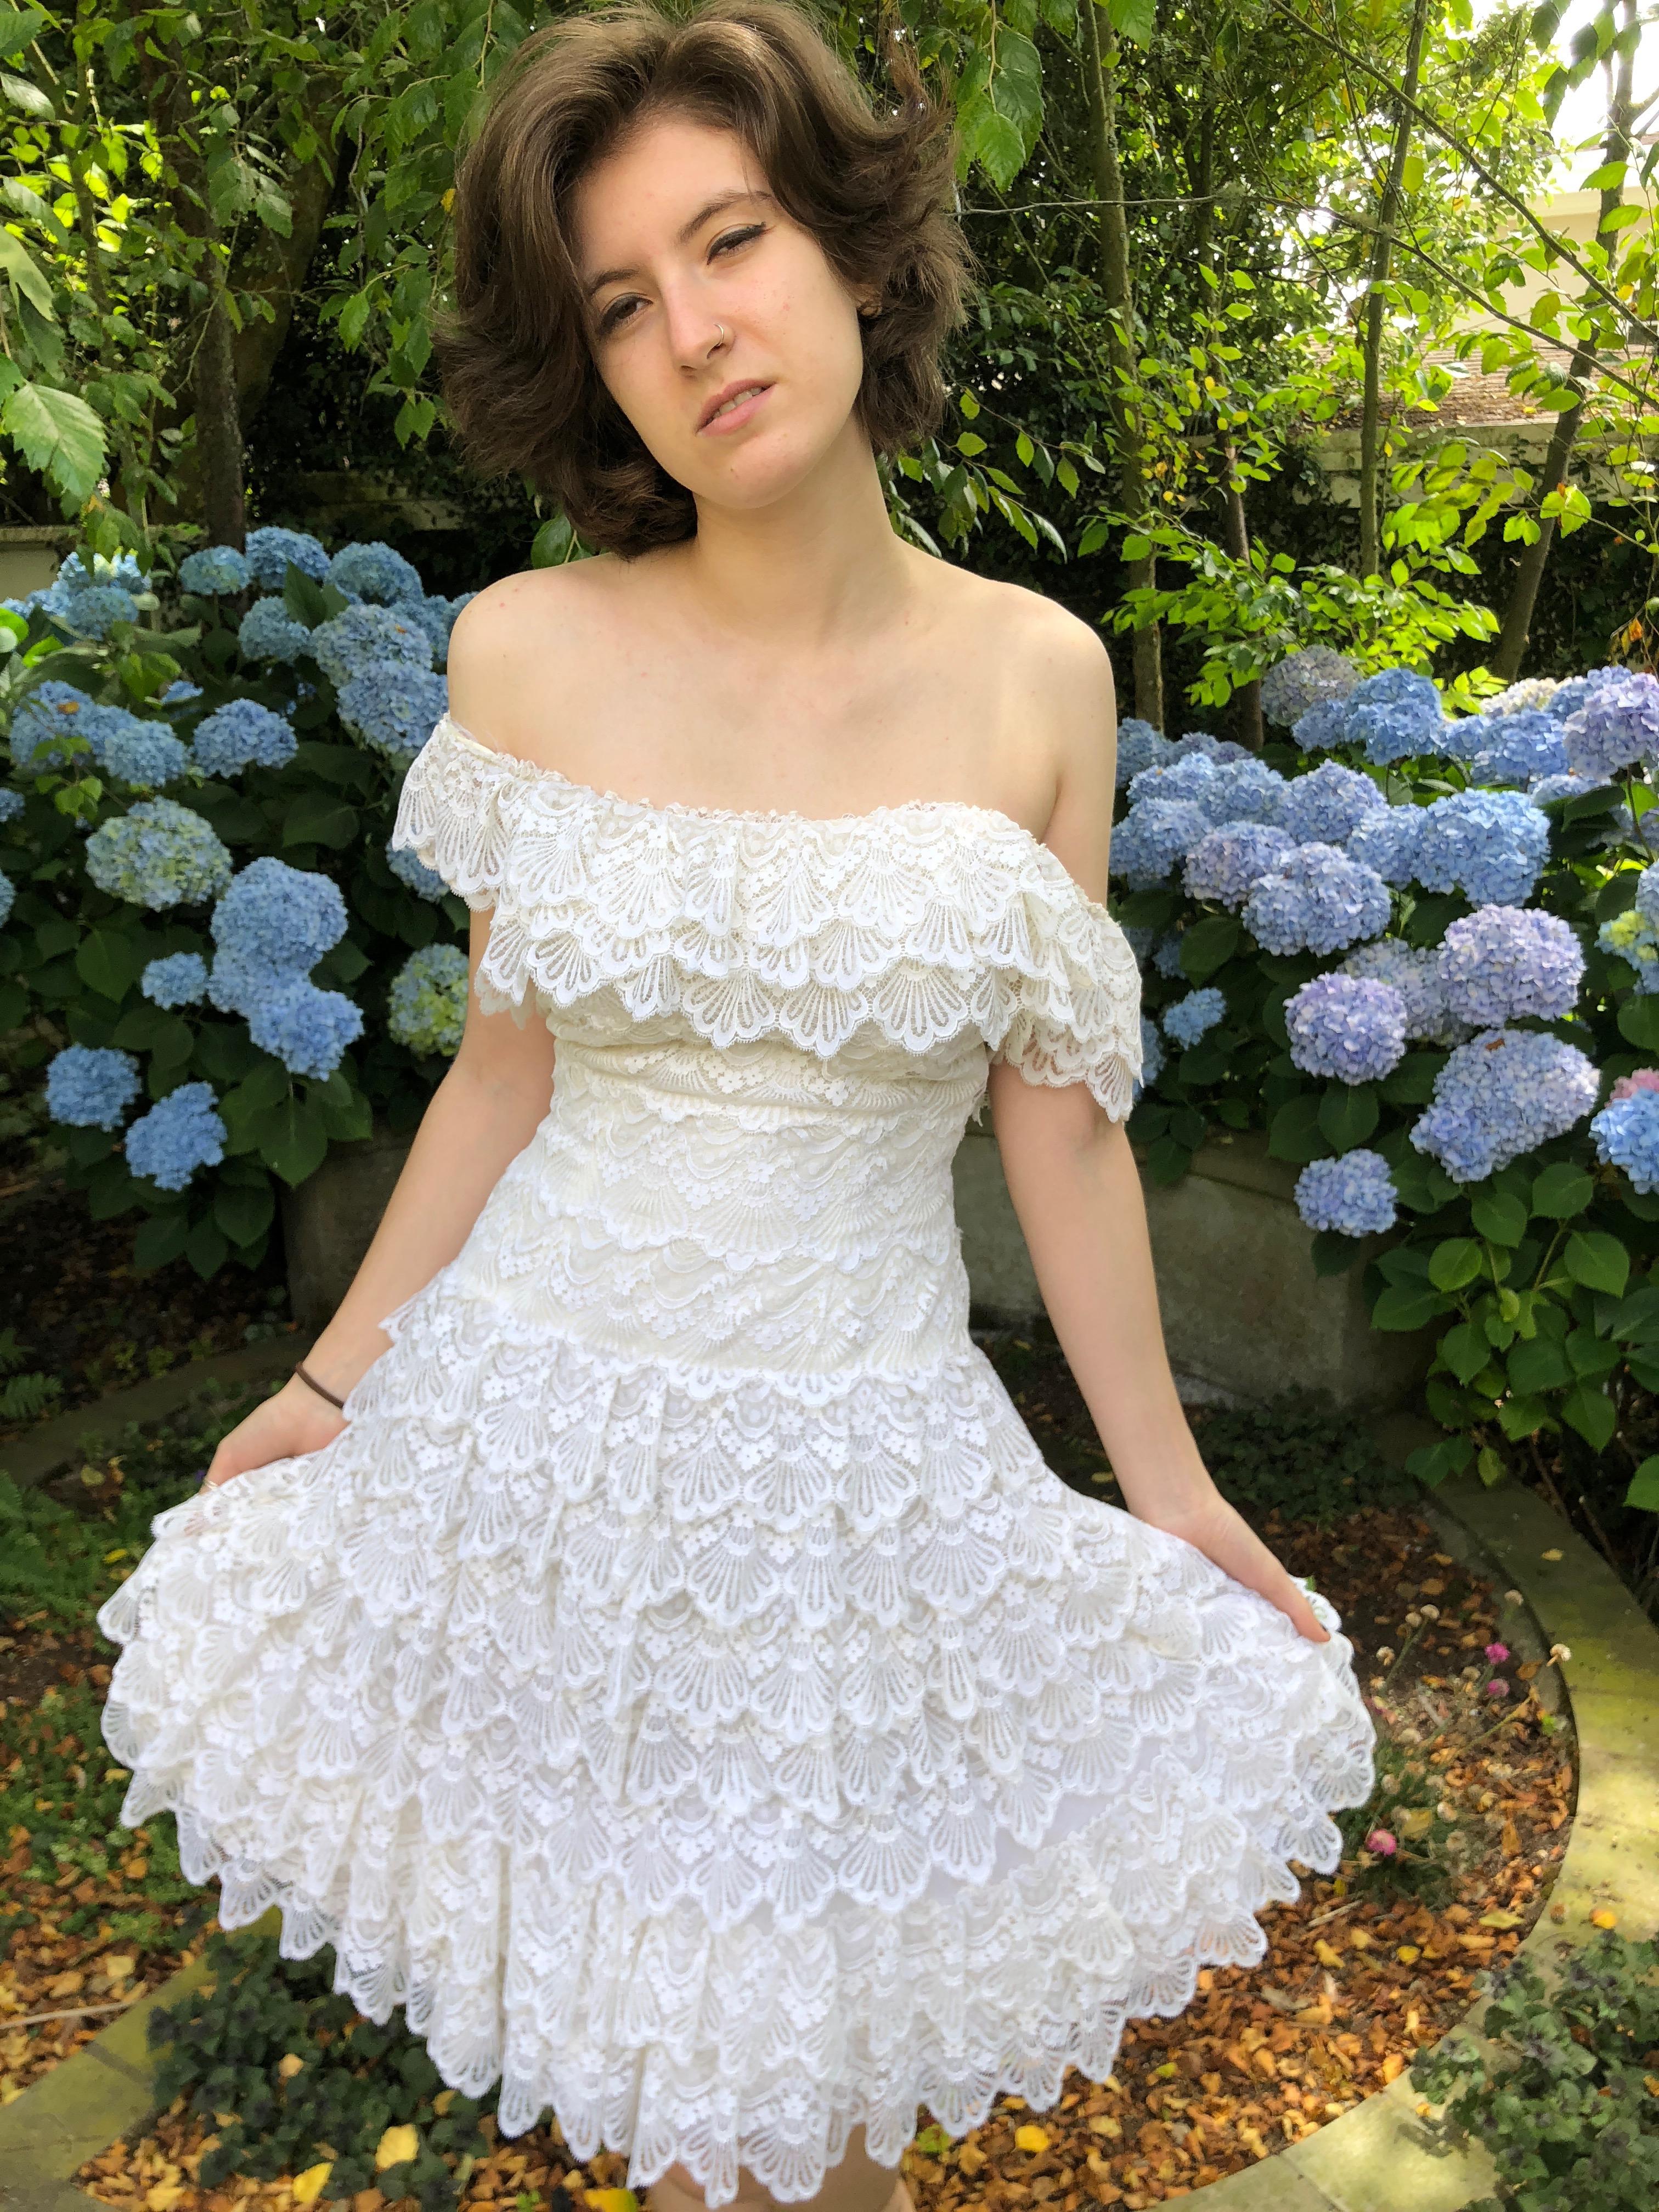 Exquisite tiered lace off the shoulder dress from Loris Azzaro.
This is from the early 1970's and would make a wonderful alternative wedding dress.
This is quite small, I would estimate it to be a French size 36, US 4.
Bust 36